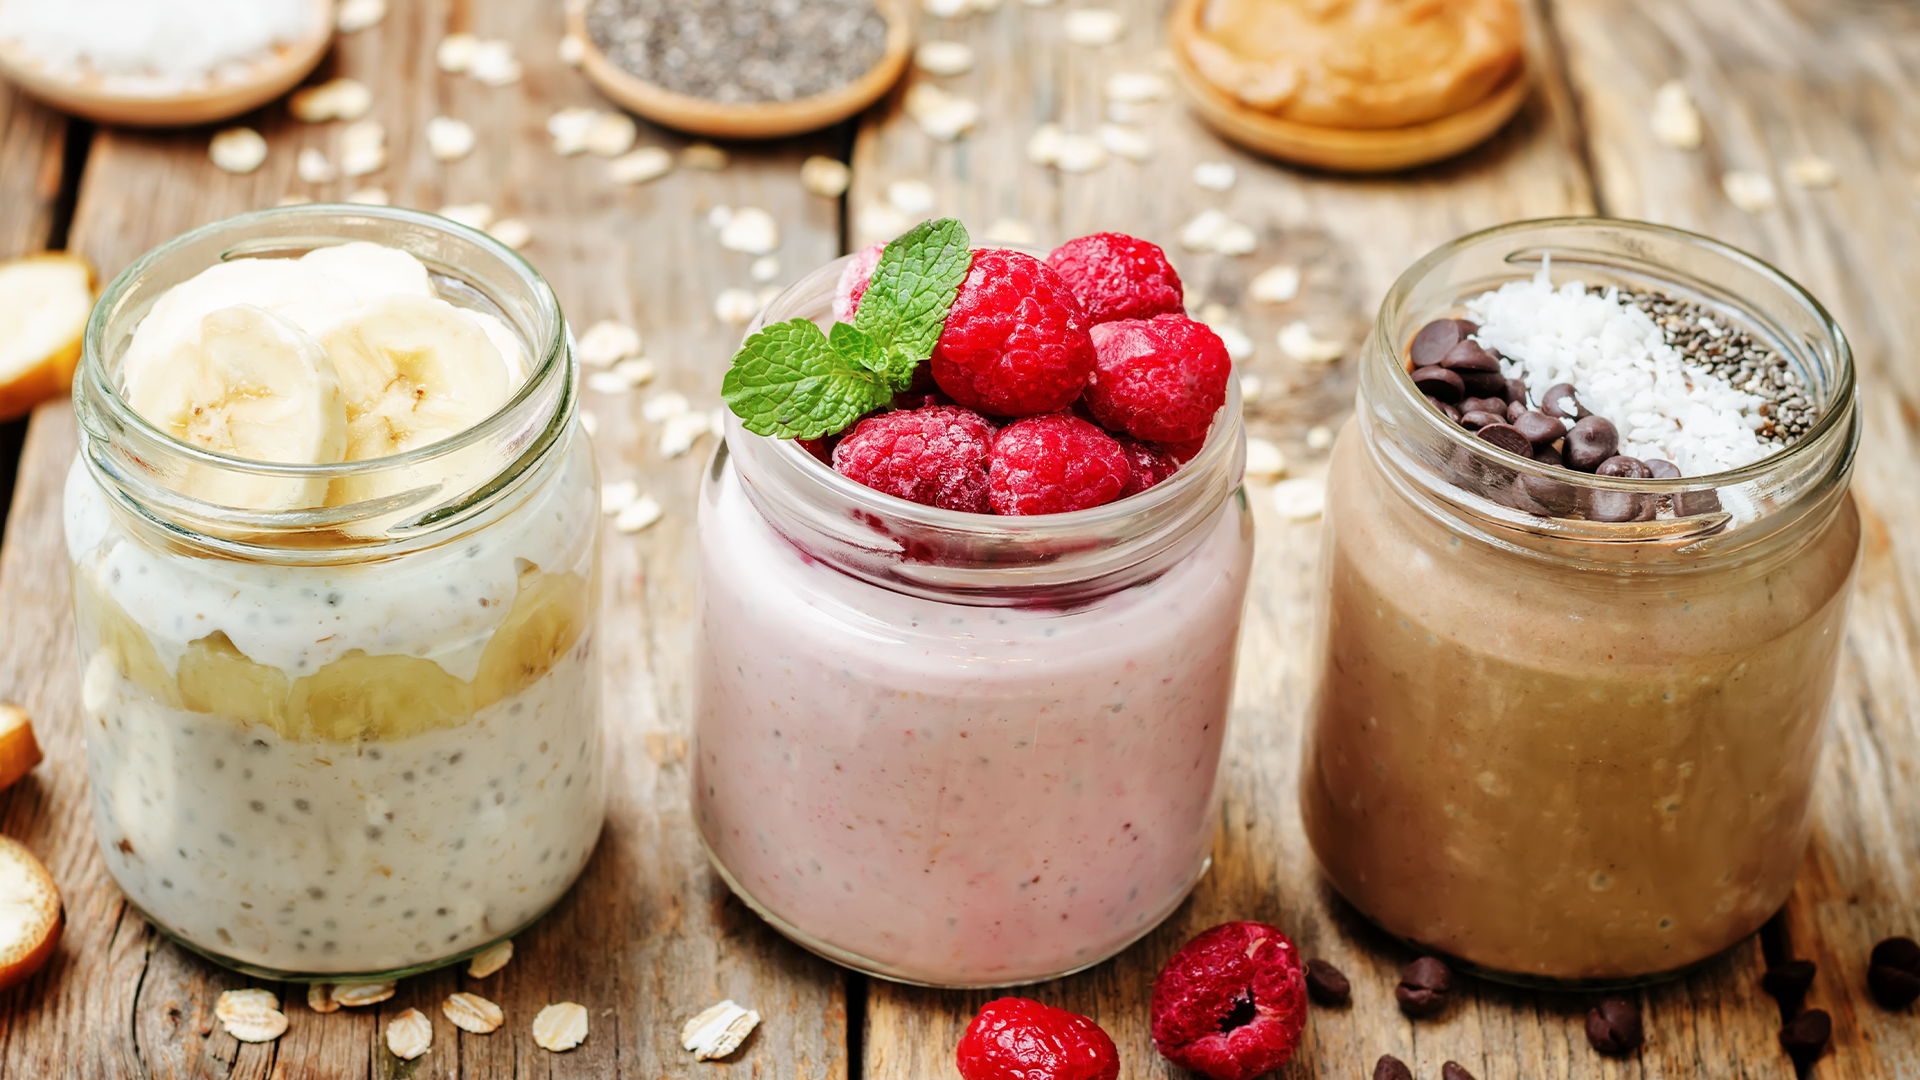 How to make protein overnight oats